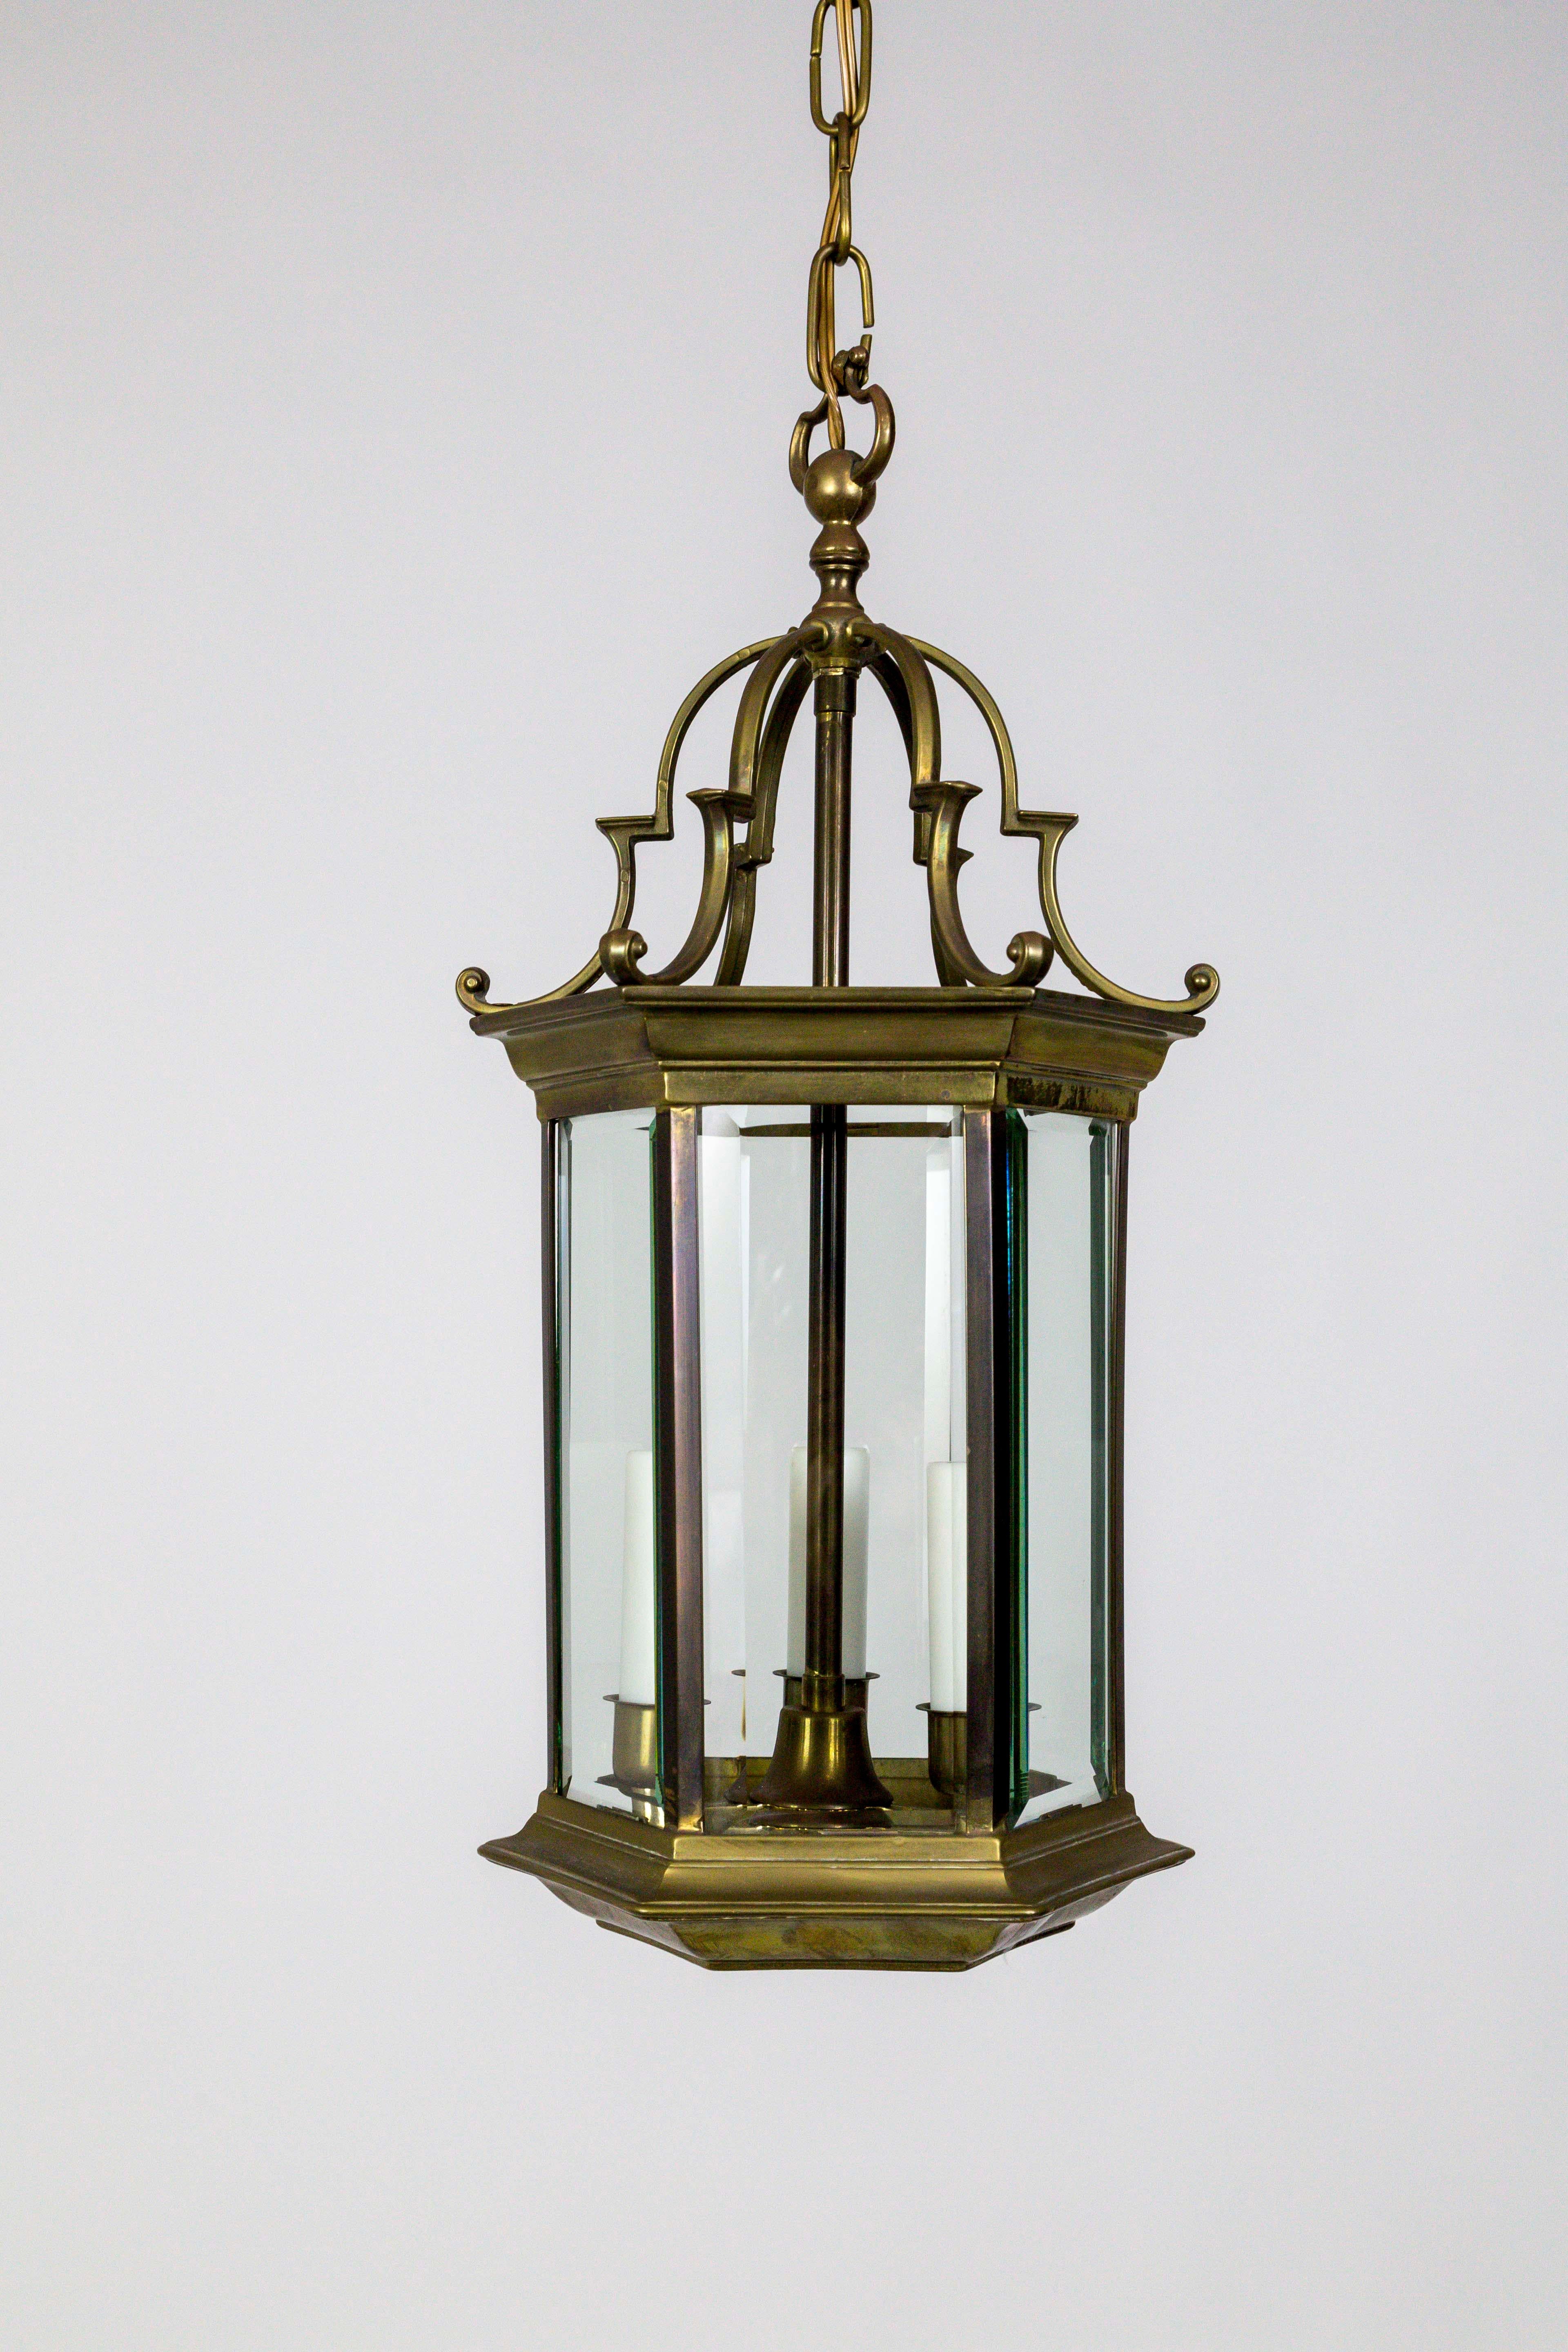 Neoclassical Revival Midcentury Italian Pagoda-Esque Bronze and Beveled Glass Lantern For Sale